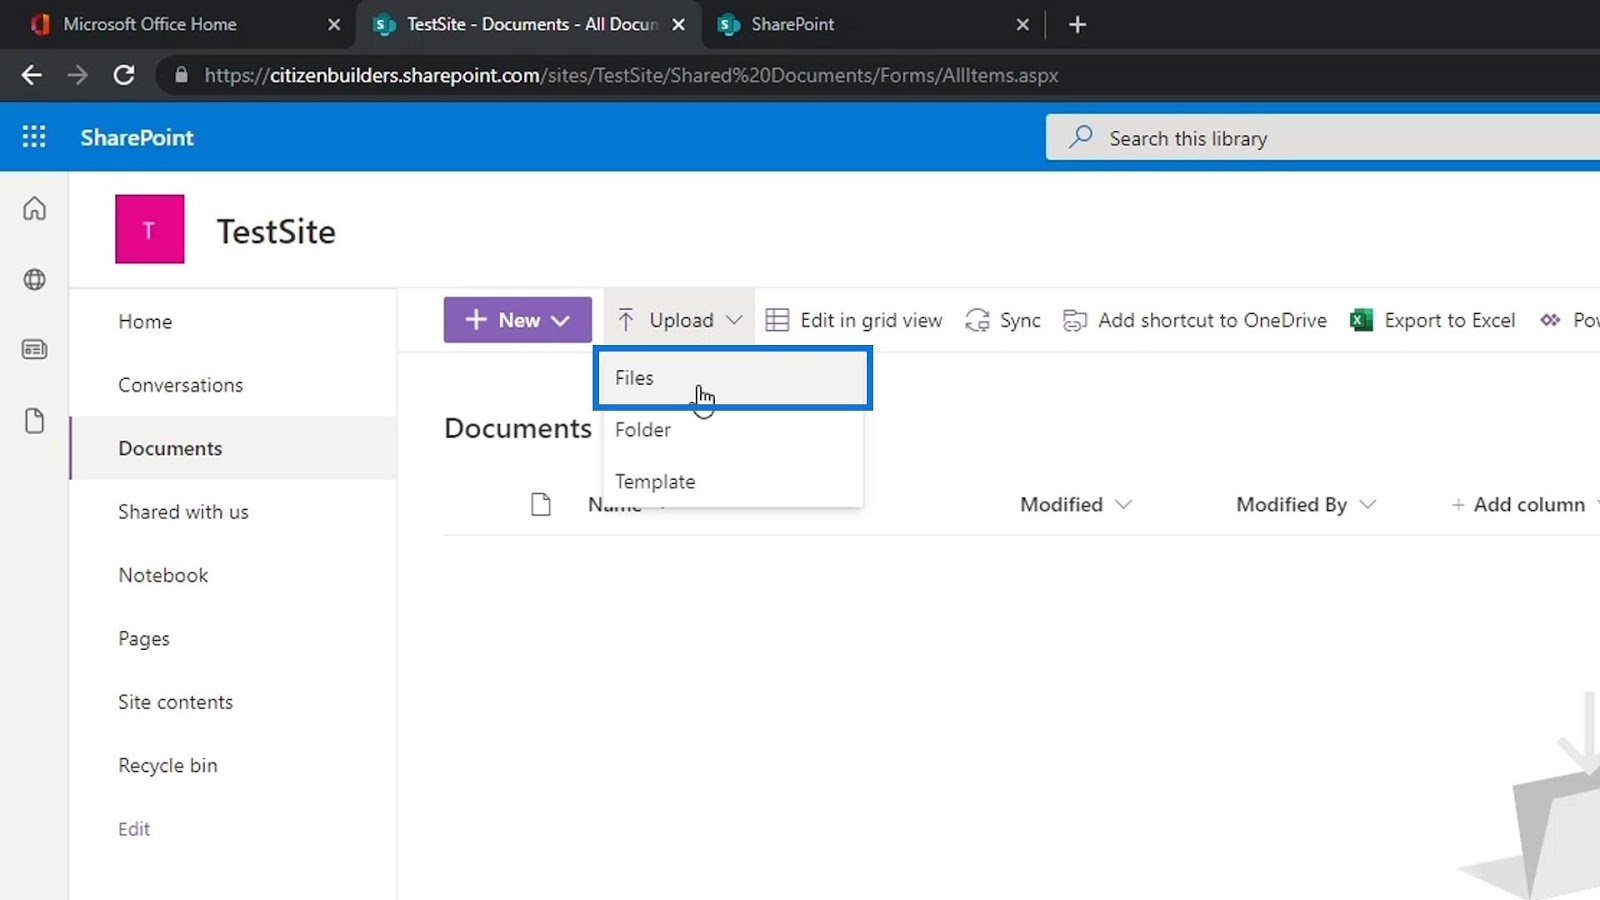 SharePoint document library